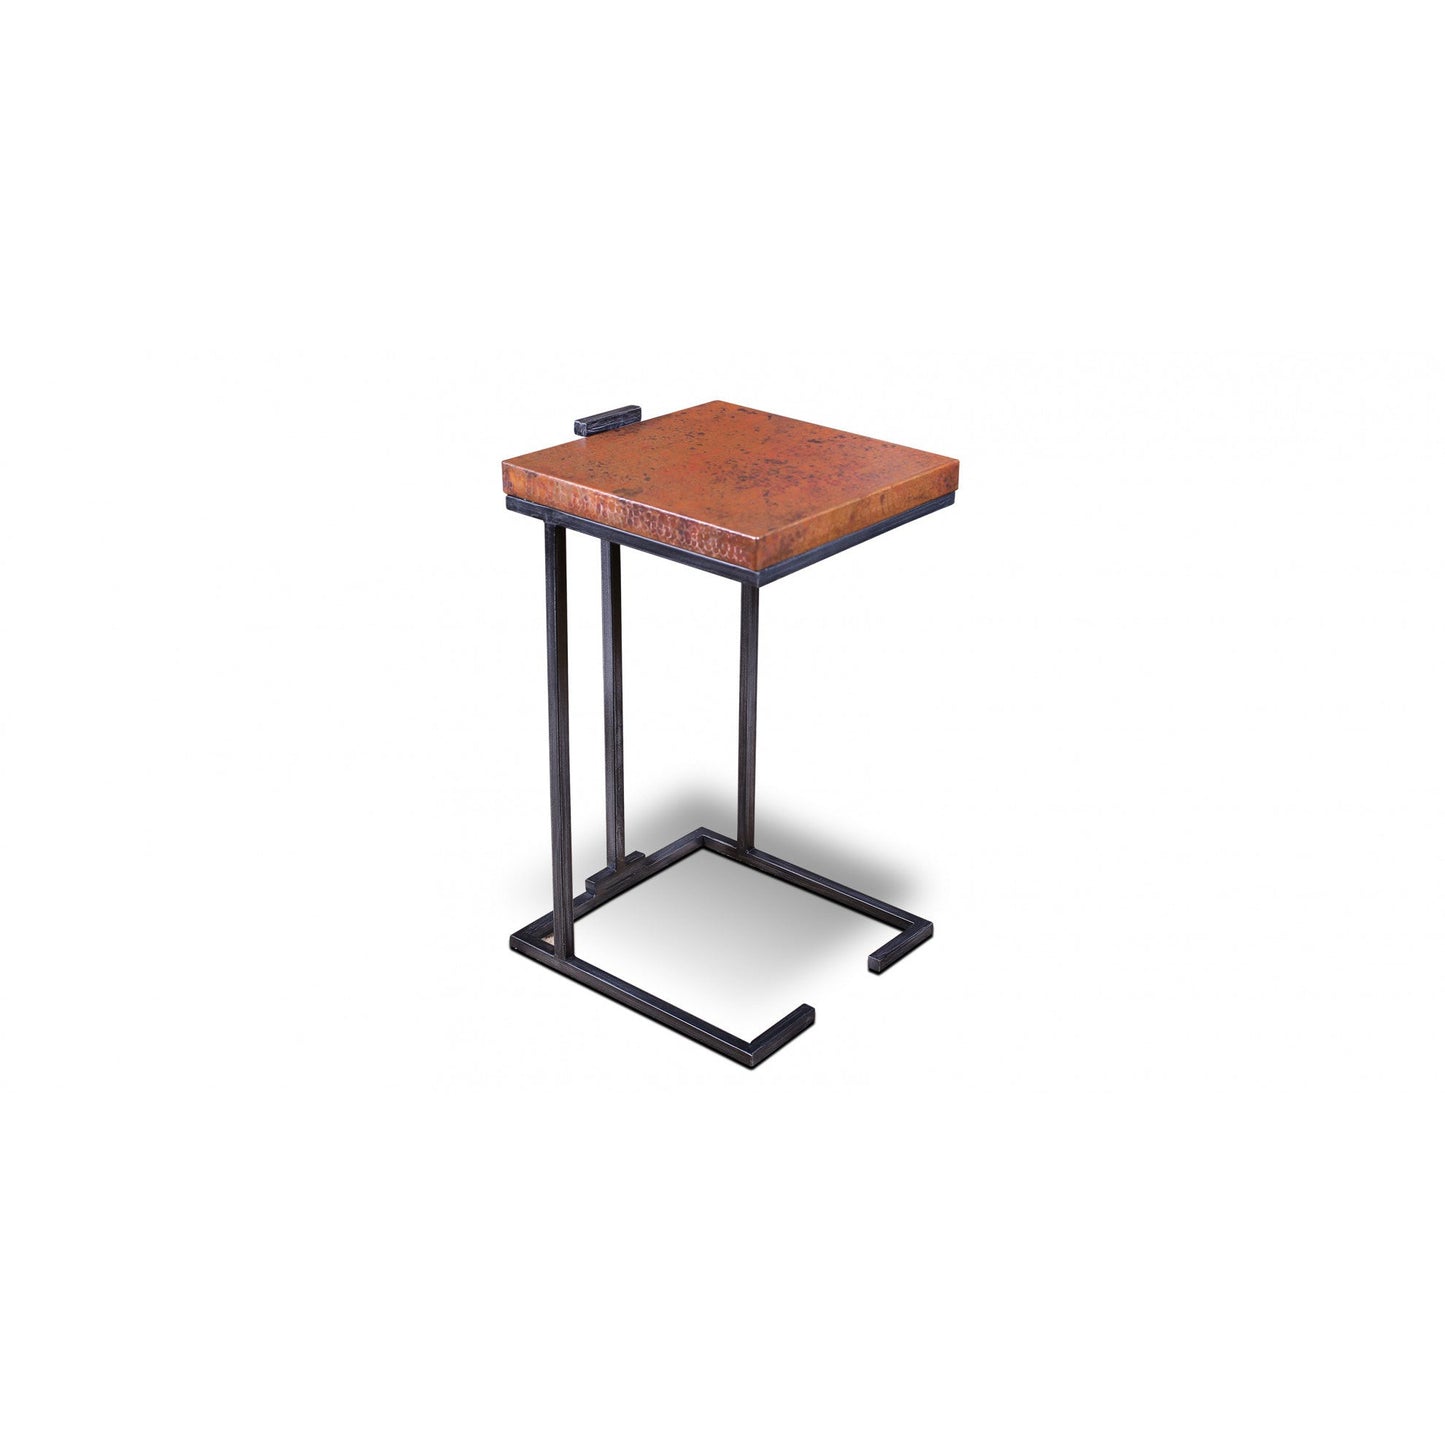 The Escalade Copper Side Table is a luxurious accent piece crafted with recycled hand hammered copper and forged iron base for a timeless look. Its sturdy construction makes it a durable addition to any living space.